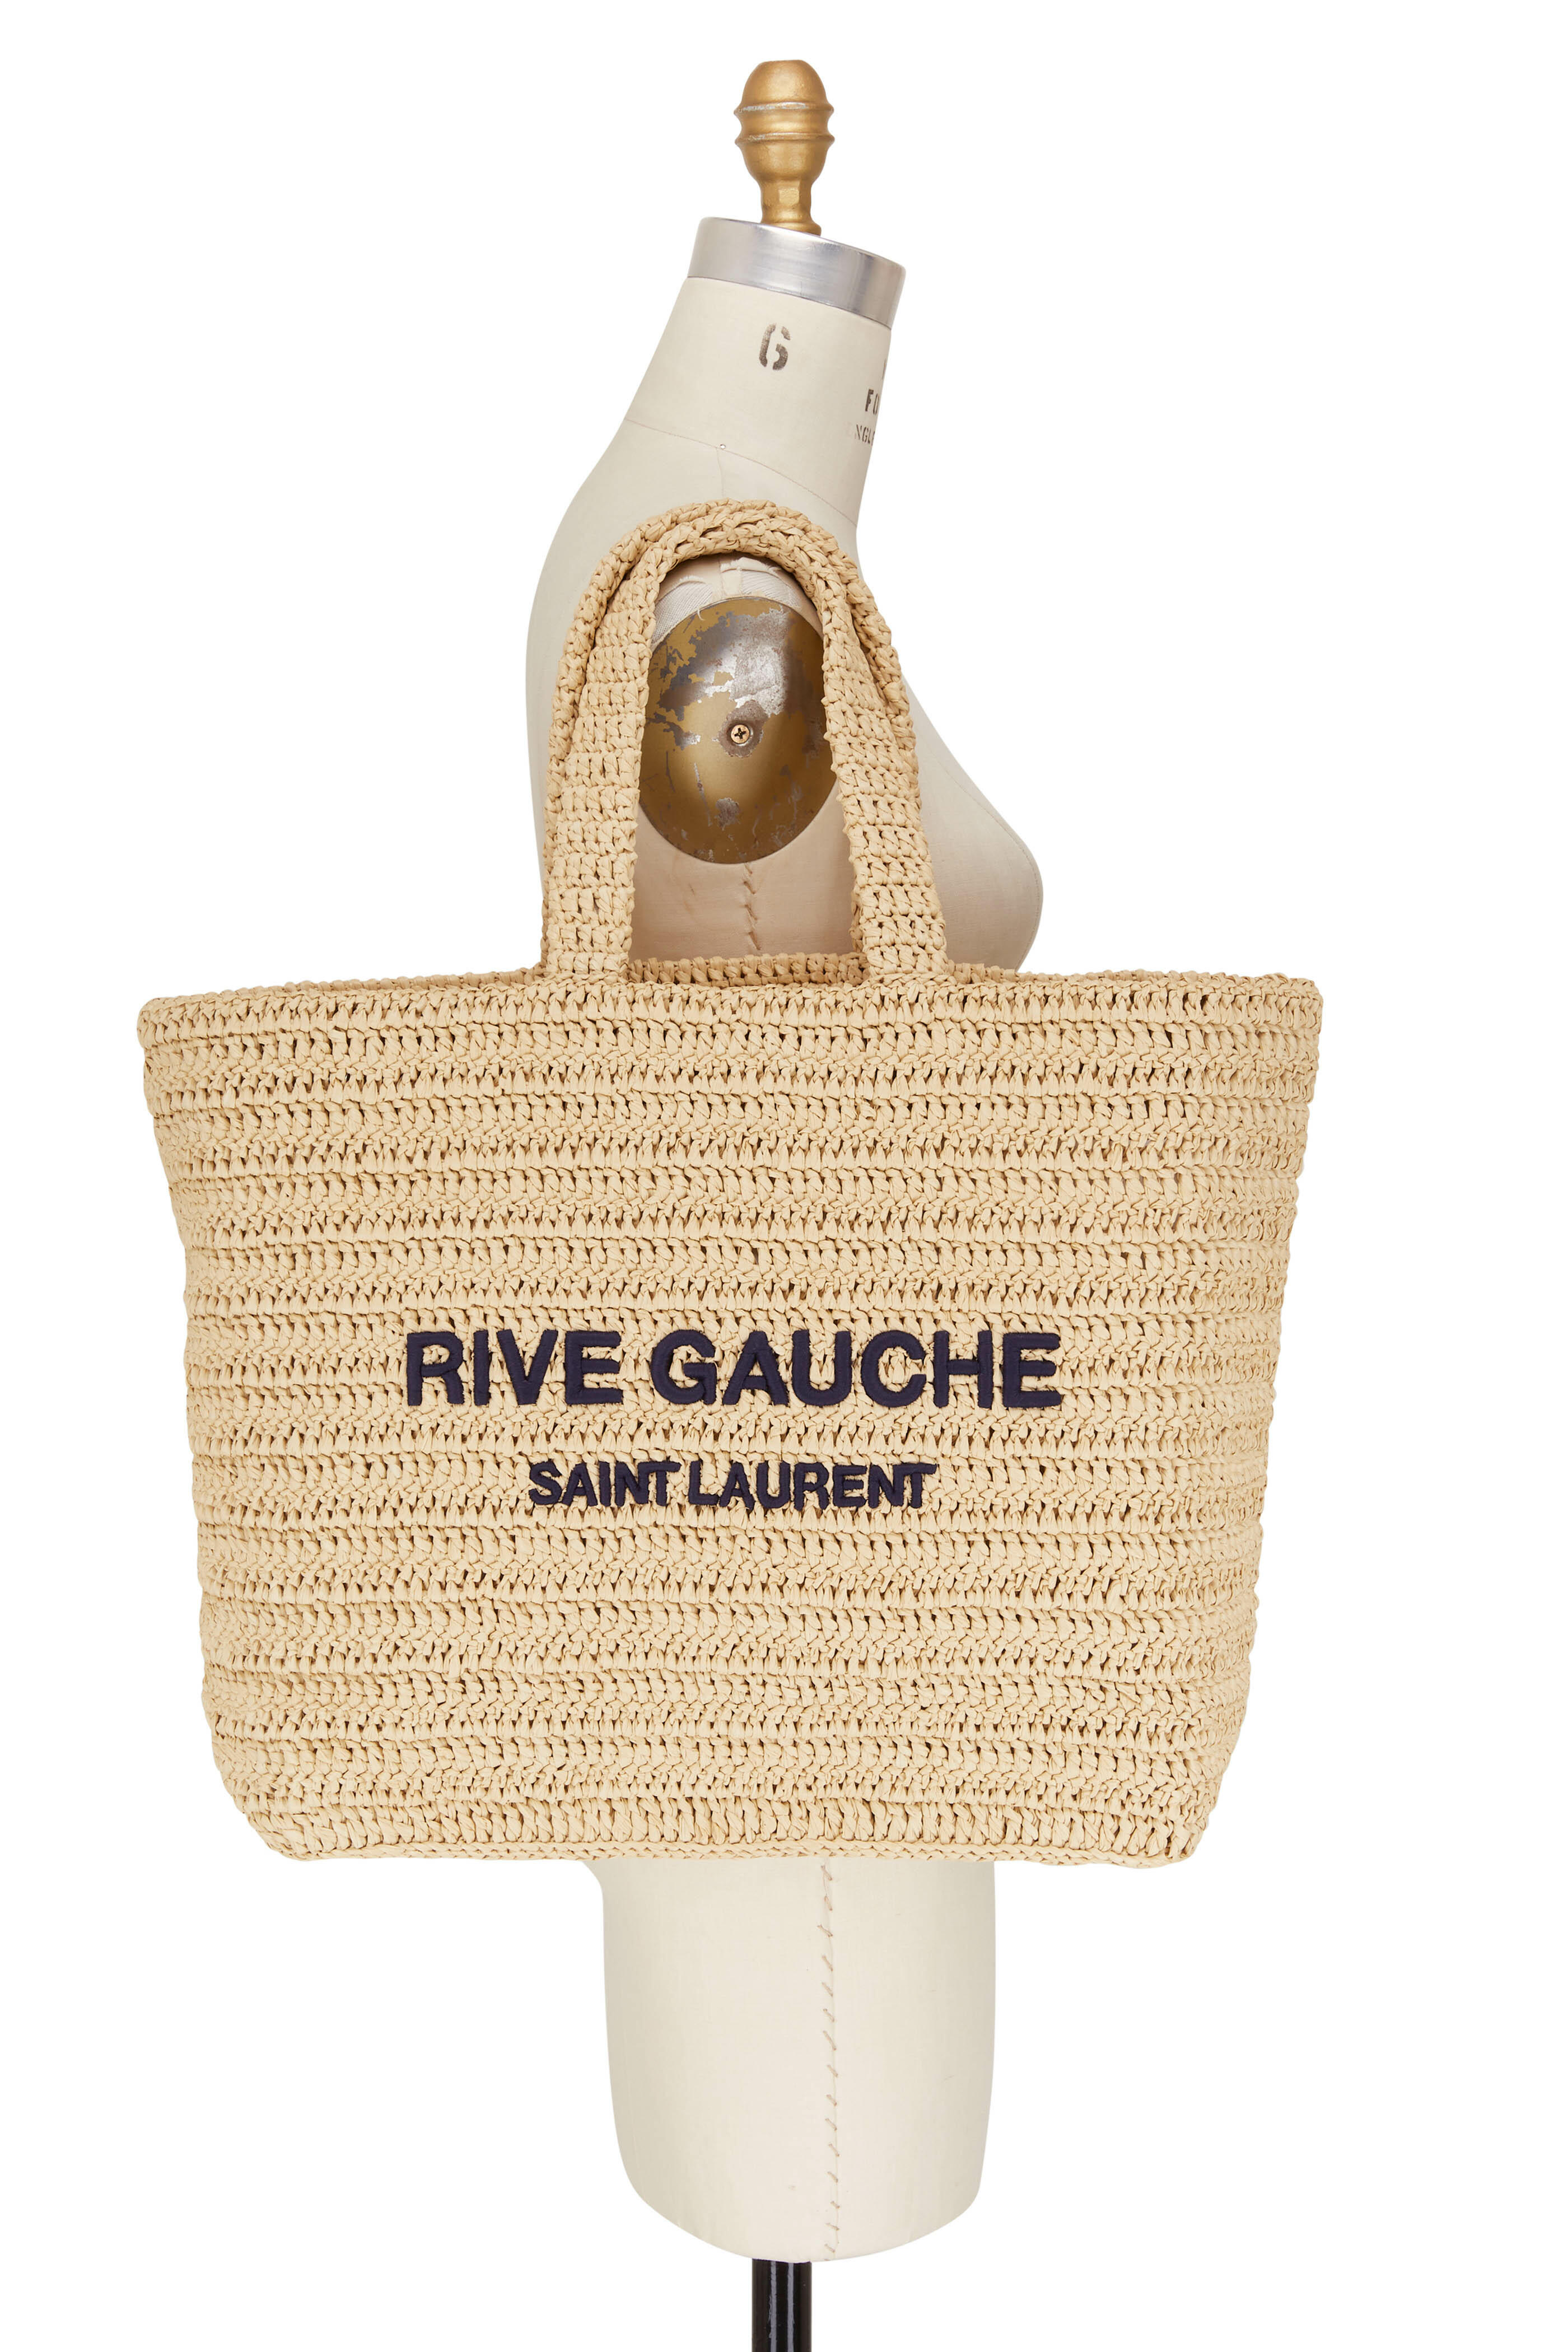 The world's most luxurious beach bag - The Saint Laurent Rive Gauche Tote*  - The Luxe List